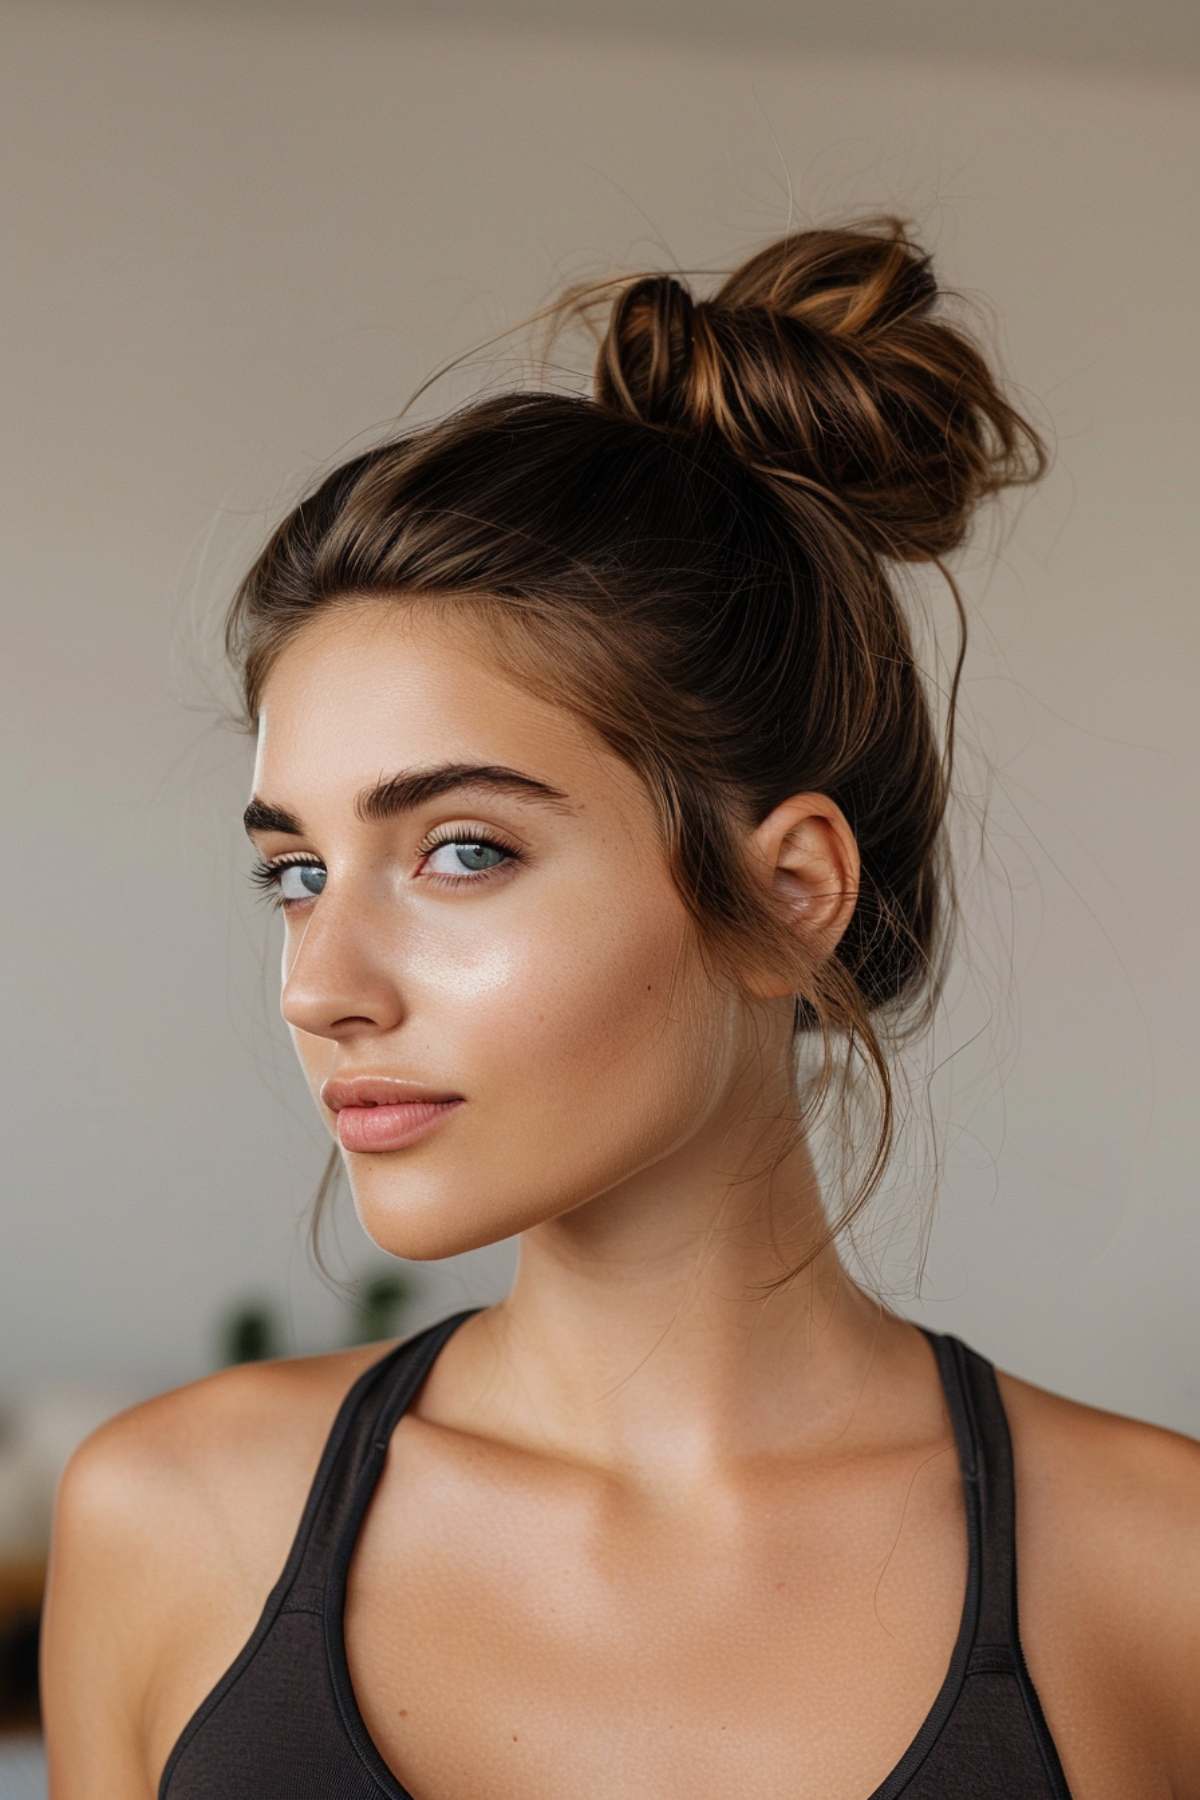 High bun updo on a woman, styled for both functionality and elegance, ideal for active lifestyles that require effortless hair management.